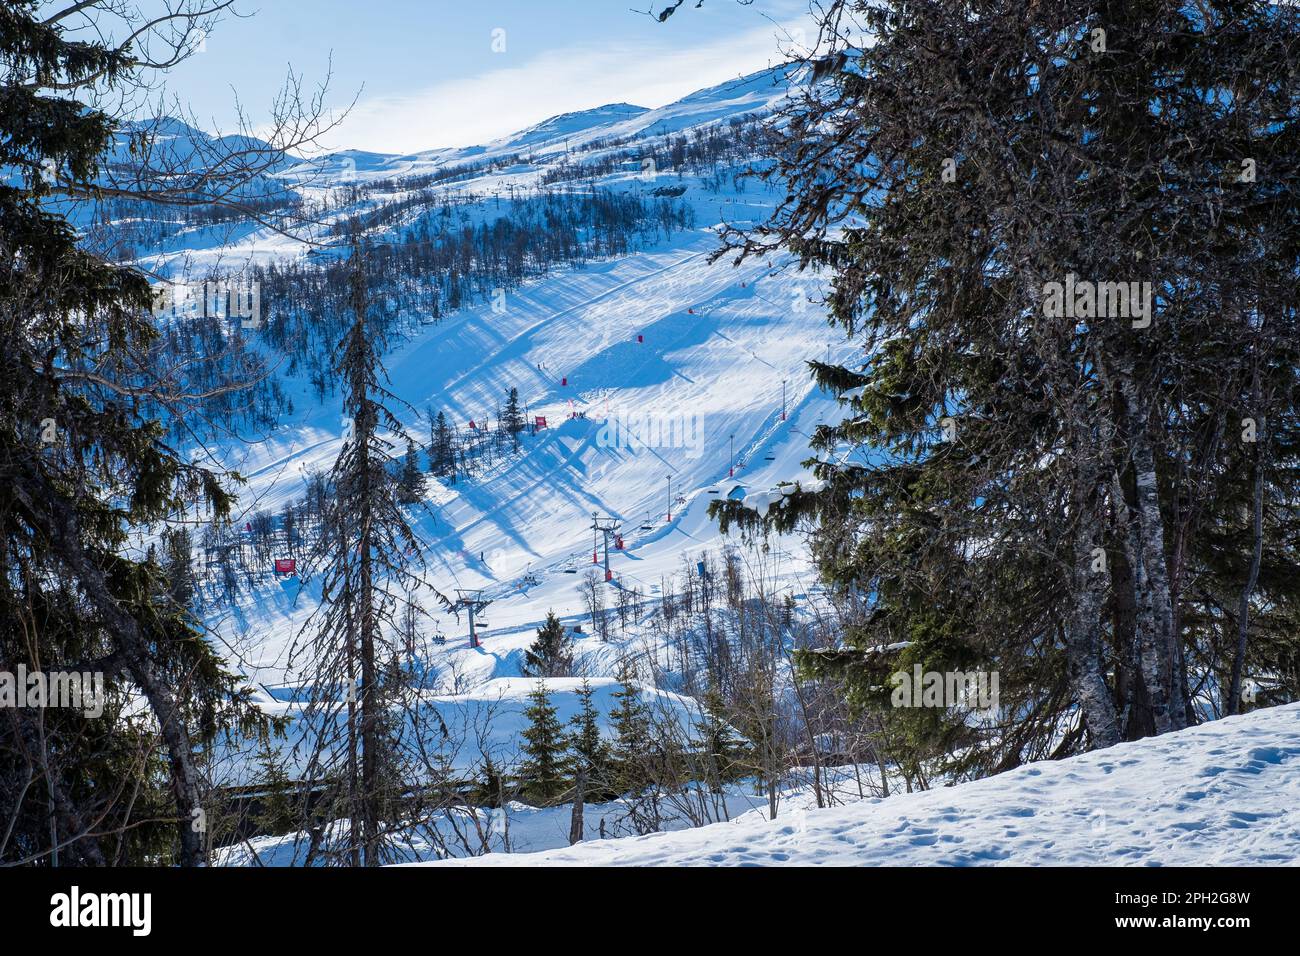 View over ski resort with slopes, chair lifts and majestic snowy mountains during winter day. Stock Photo